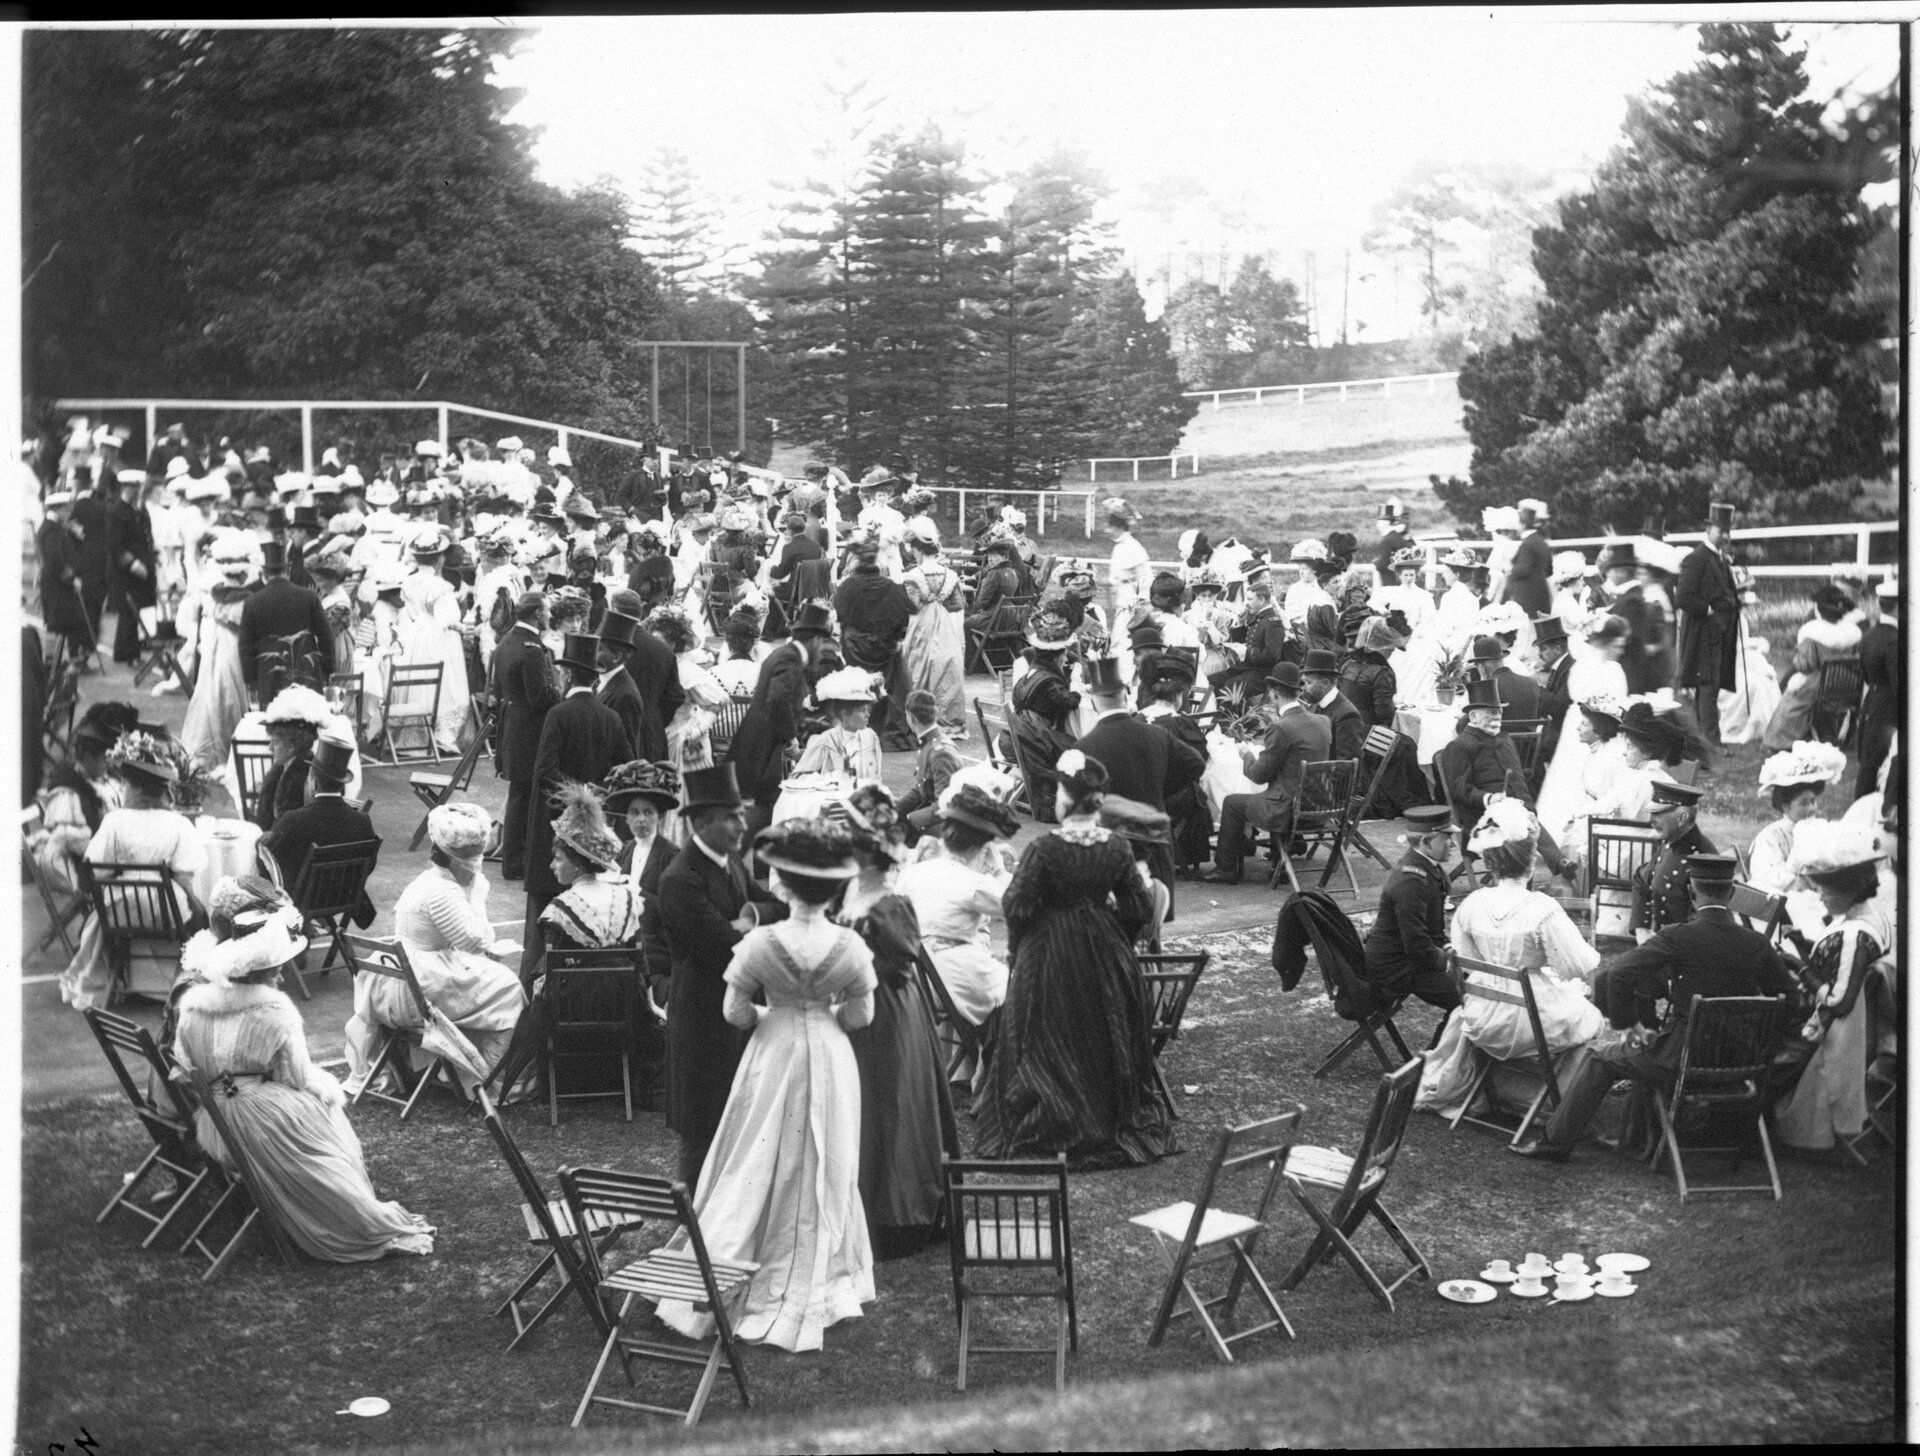  A crowded garden party of men and women in formal dress